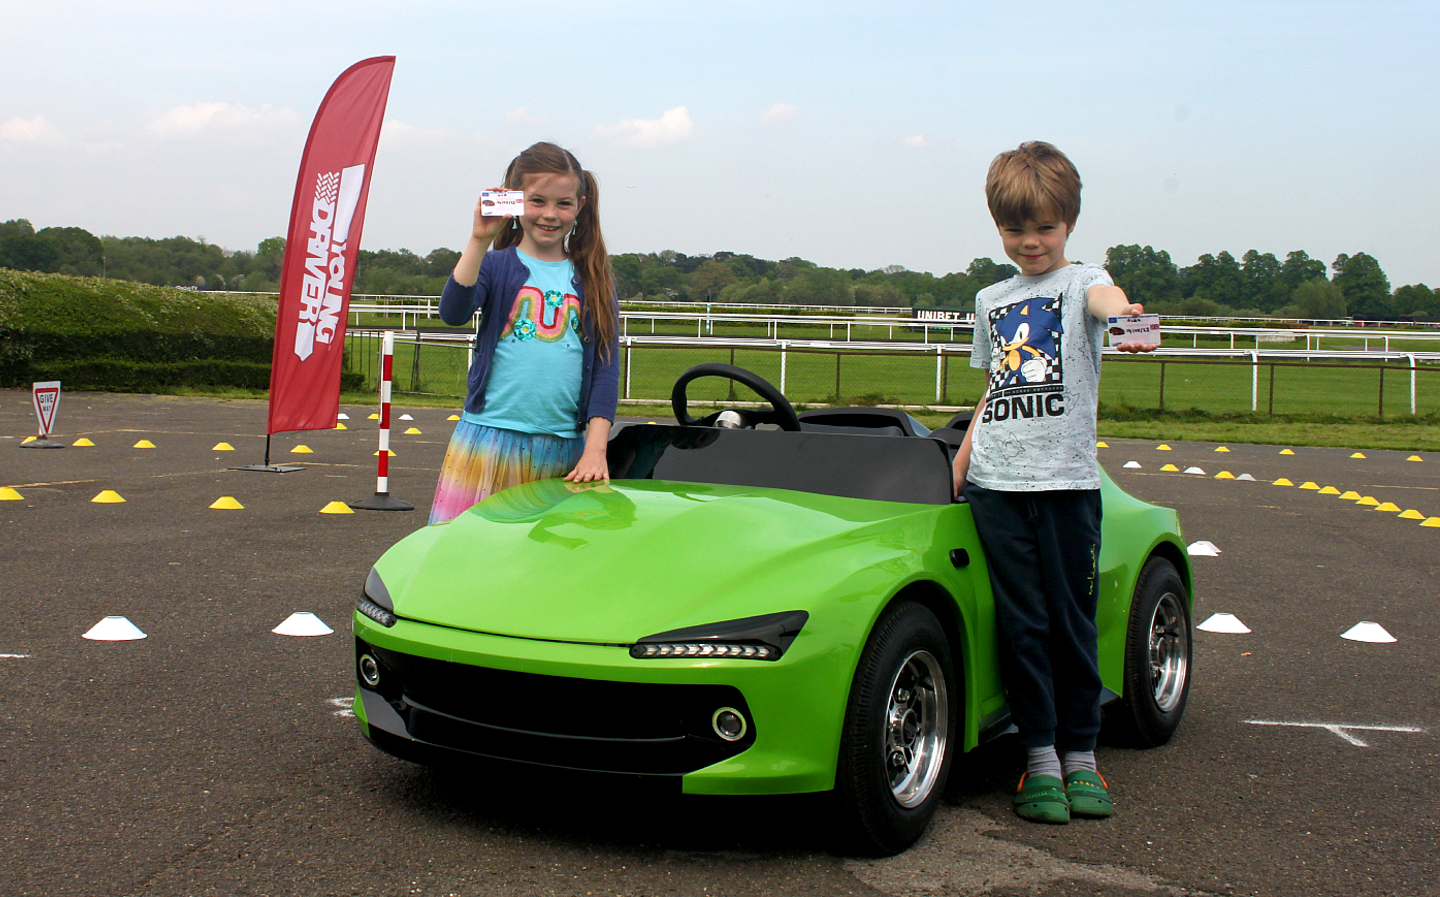 Young Driver Firefly Sport driving lessons for under-10 year olds